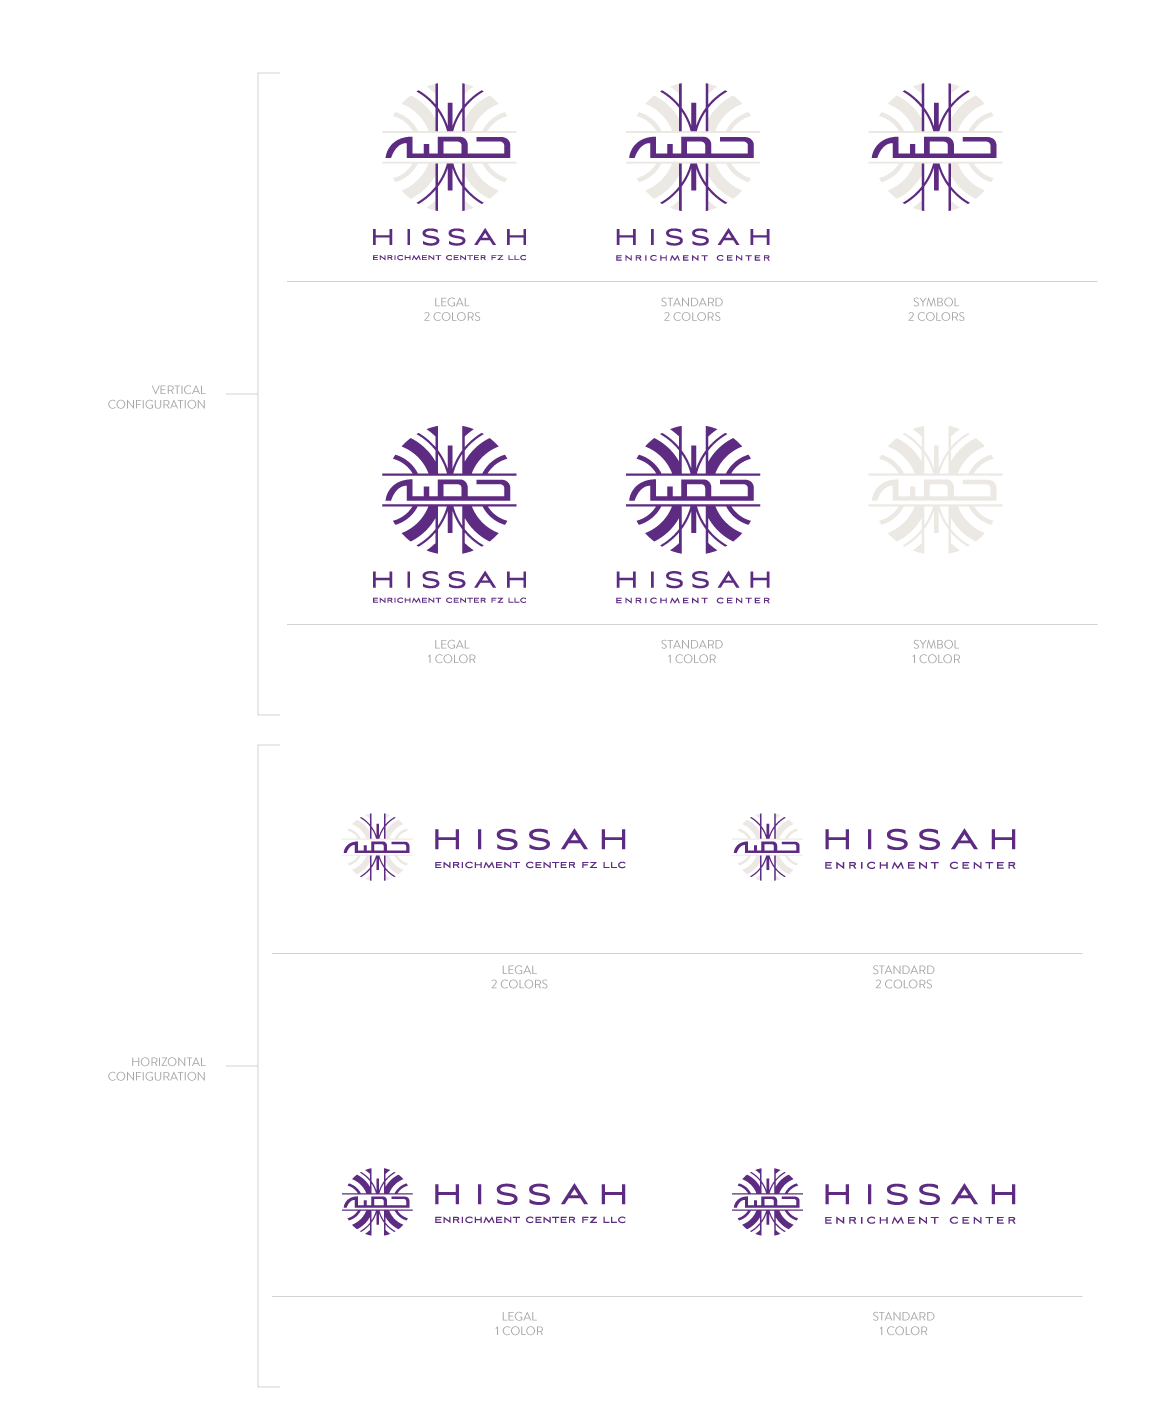 Logo versions and applications